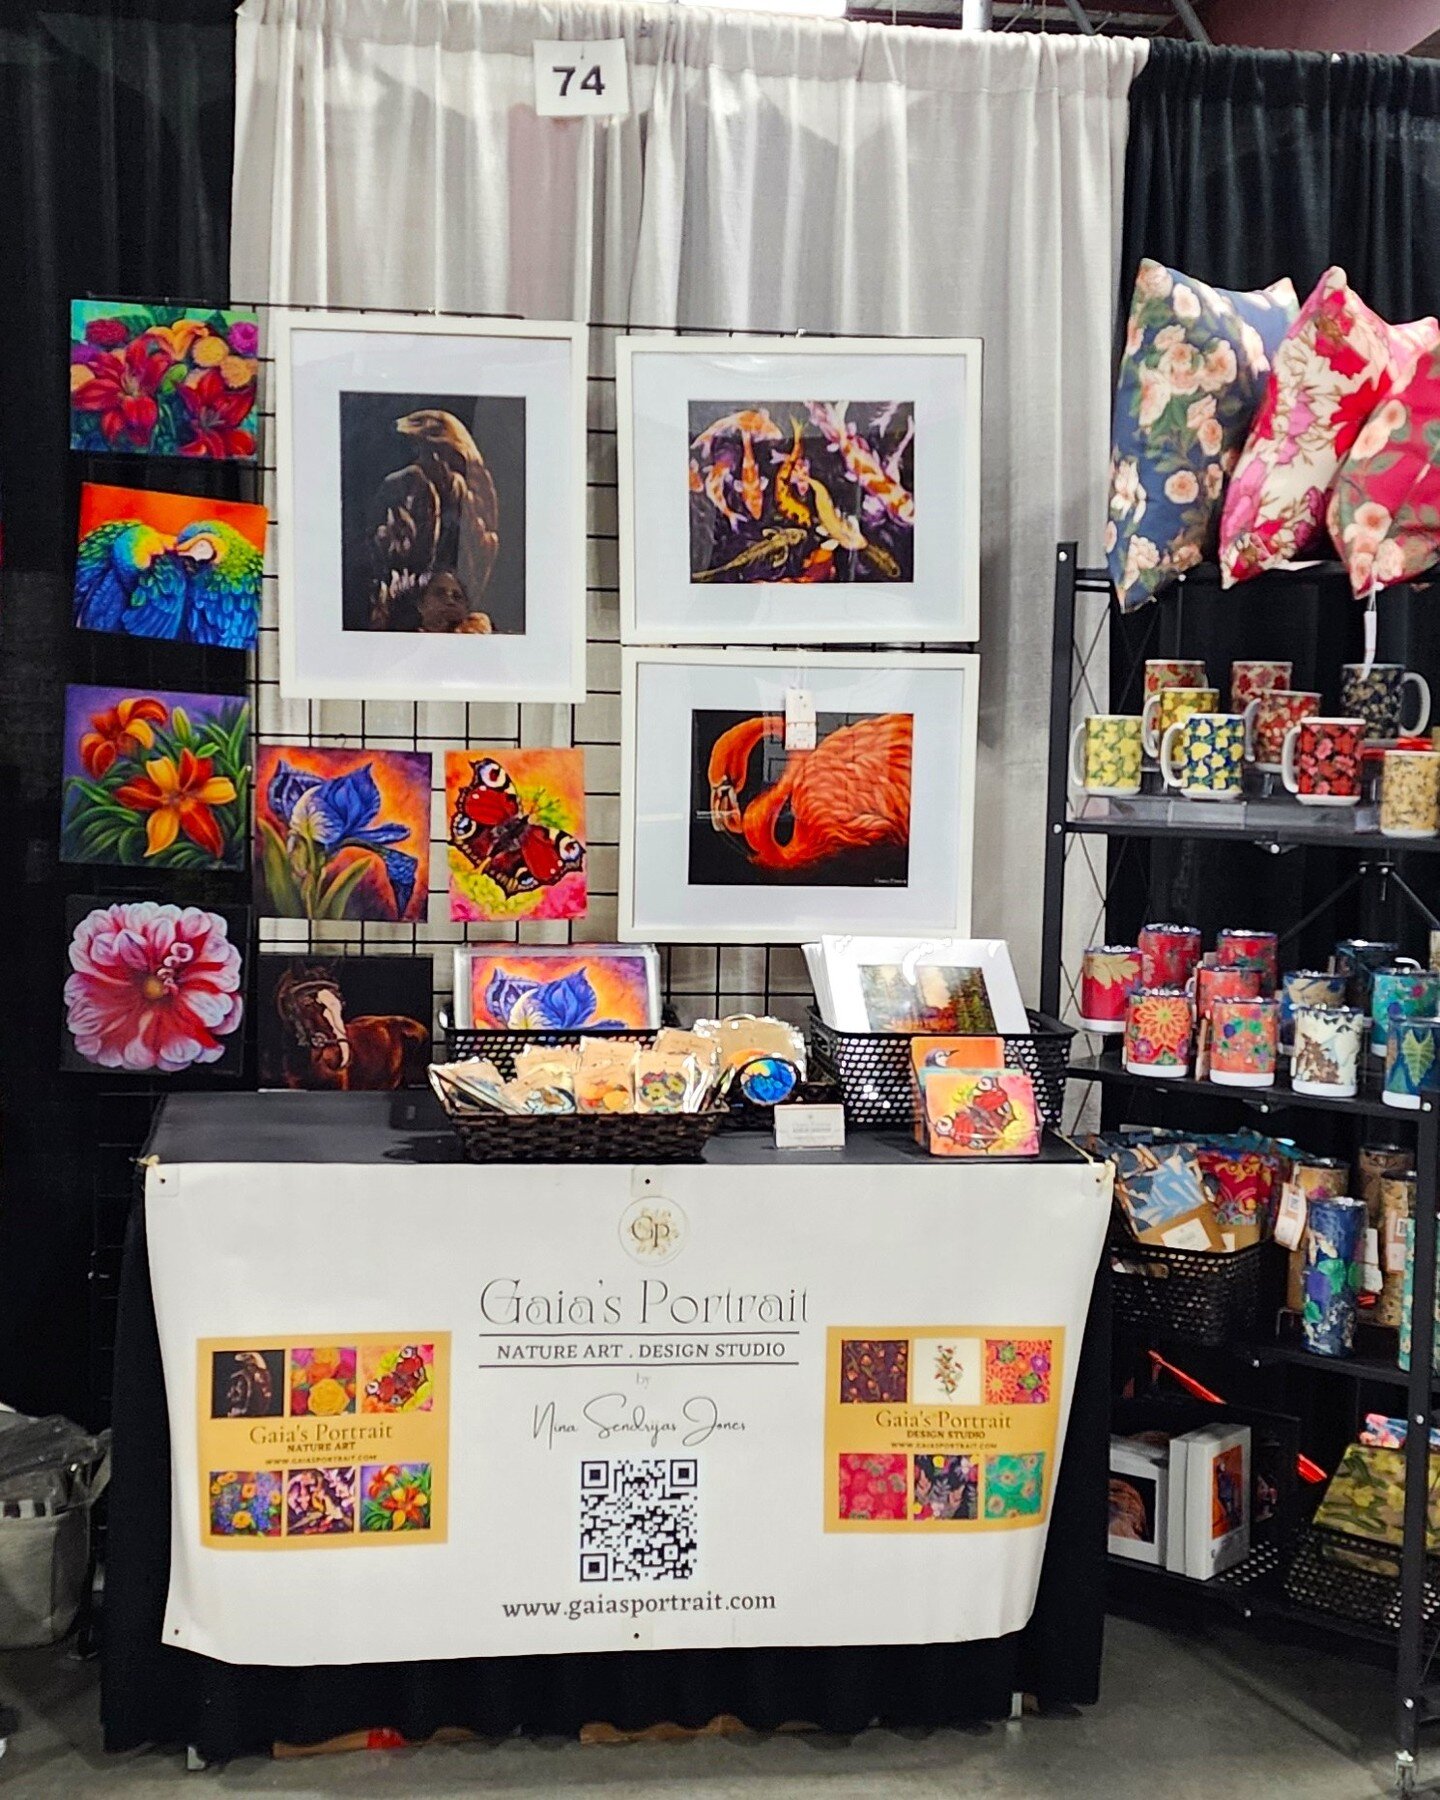 Here we go guys, ready for tomorrow! Find Gaia's Portrait, Booth #74 at the 35th Annual Didsbury Trade Show! find Nature inspired Art Prints, original artworks and designs, custom printed on home and gift items!

Hope to see you tomorrow.❤️

Gaia's P